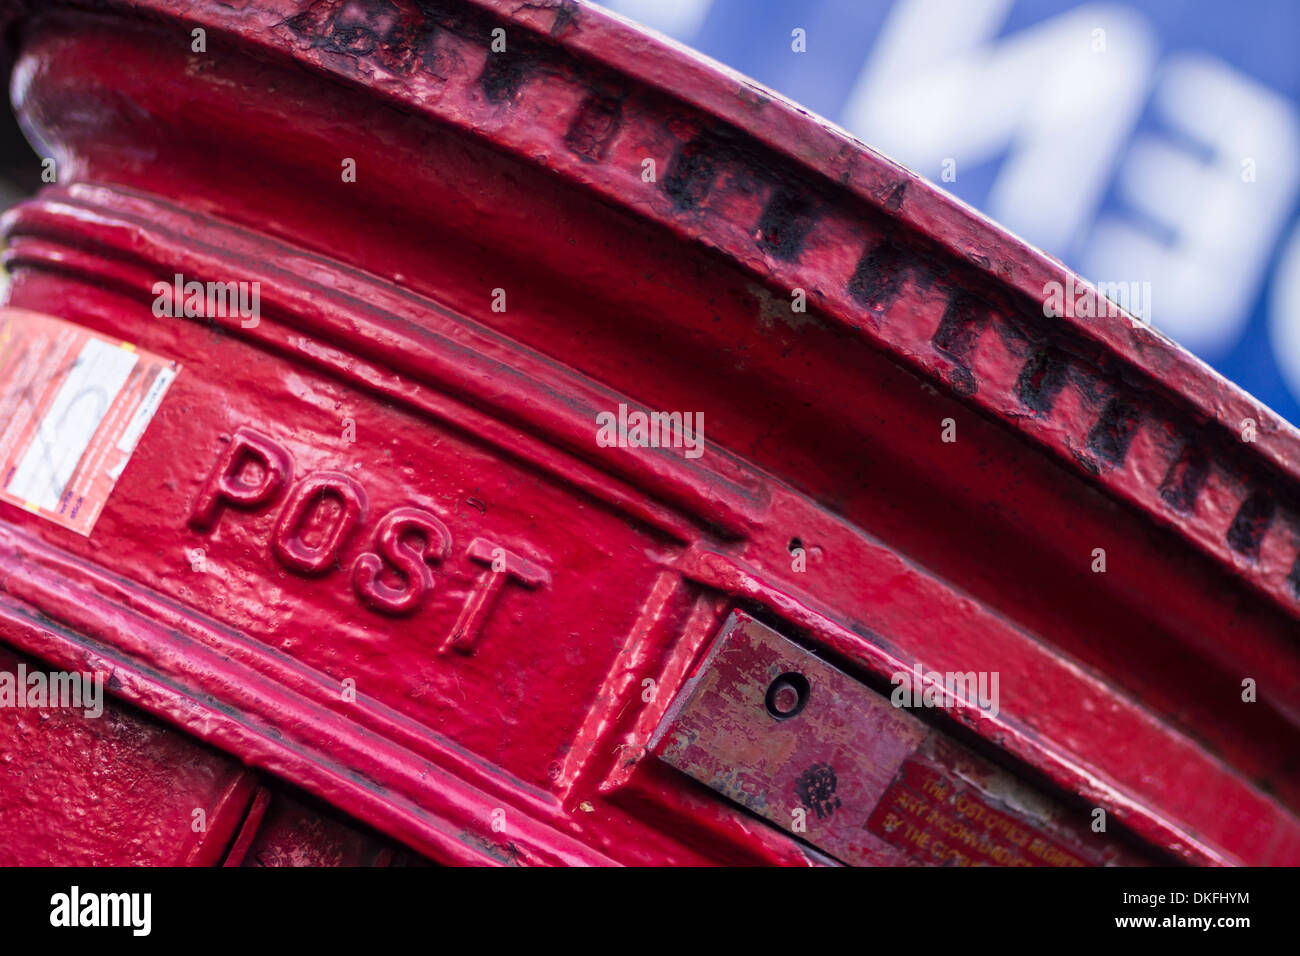 Close up detail image of a UK Royal Mail Red Pillar Box with the word POST clearly shown. Stock Photo